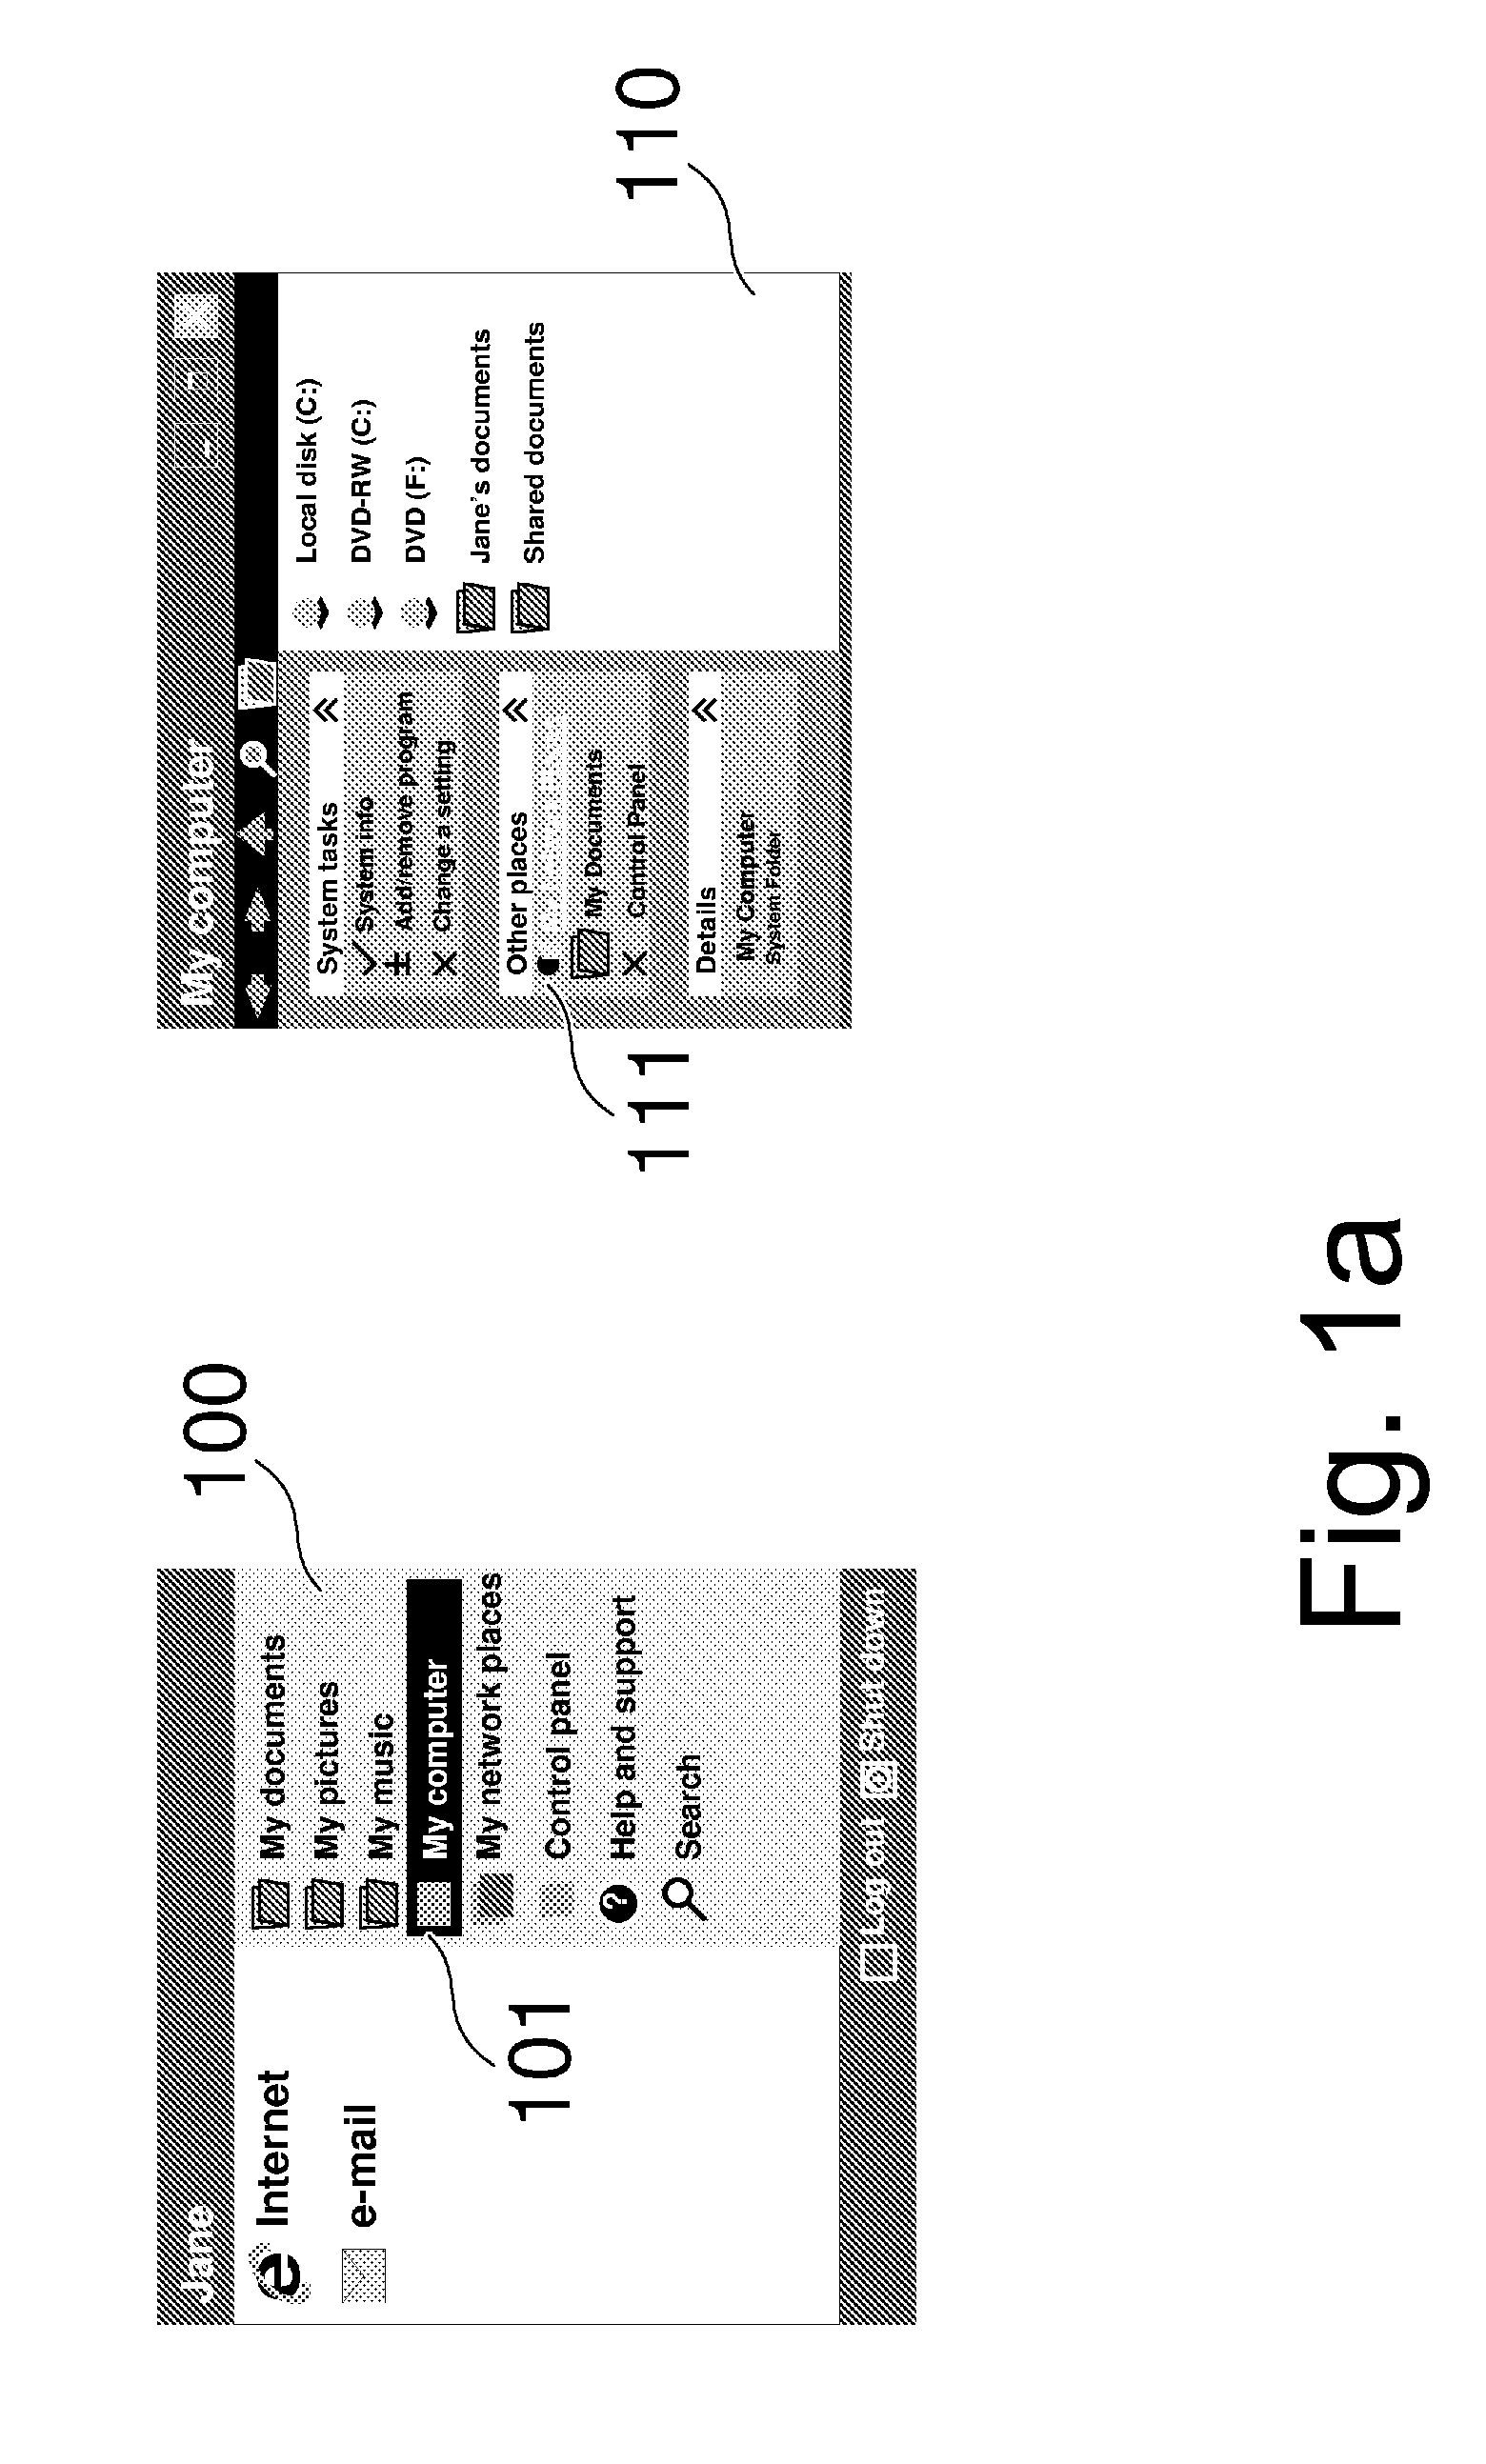 Method and System for Access to Material on a Web Site